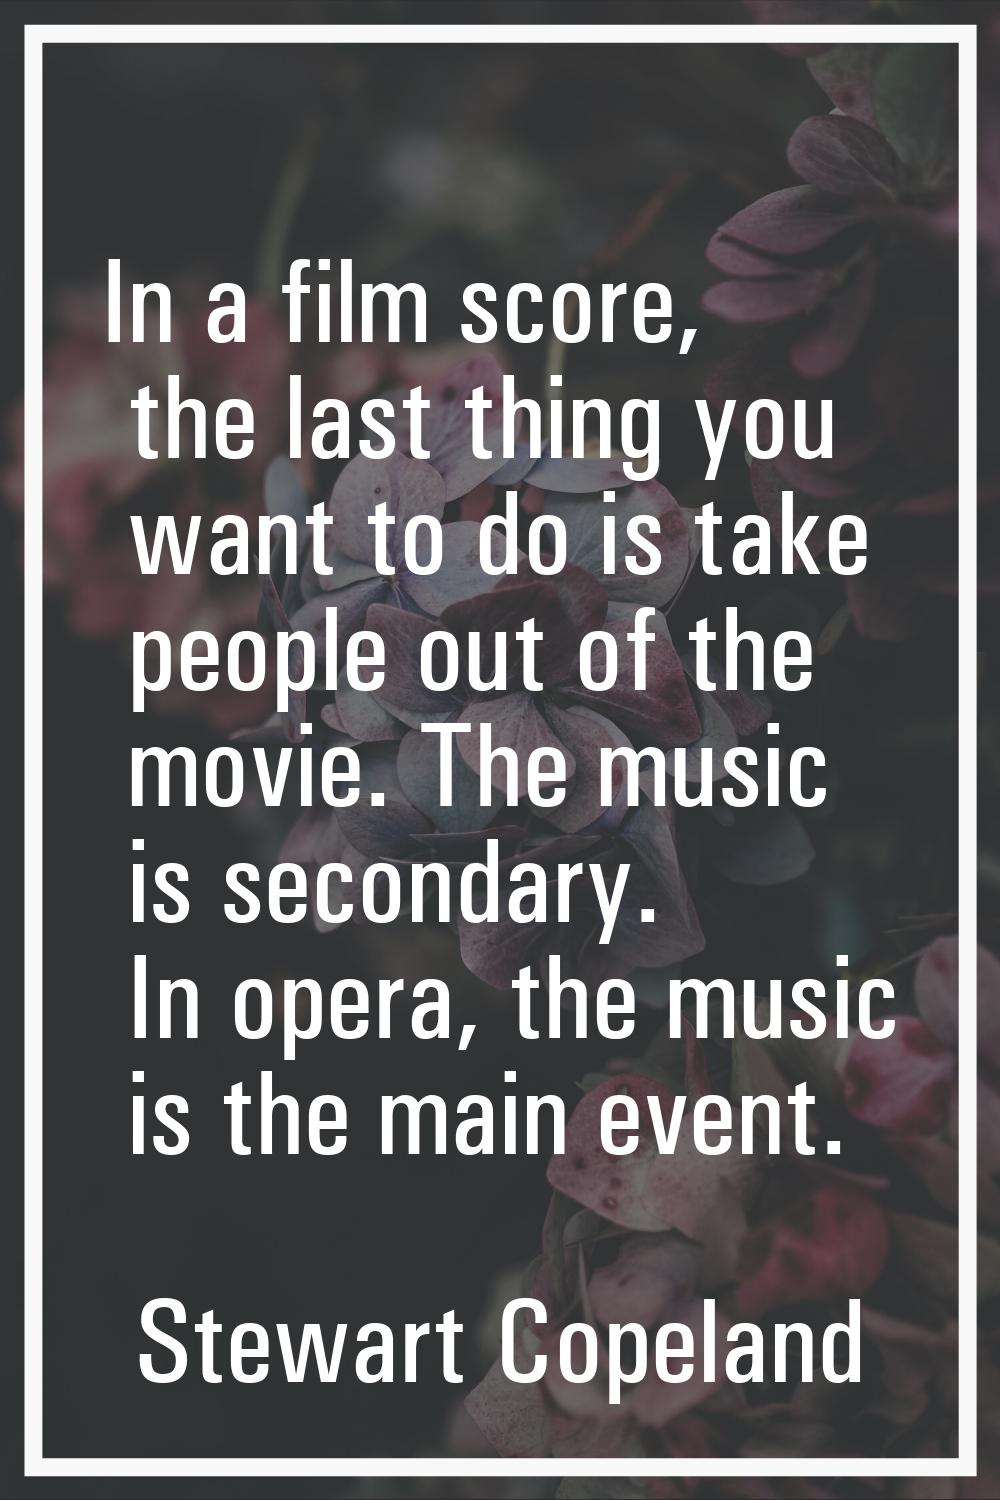 In a film score, the last thing you want to do is take people out of the movie. The music is second